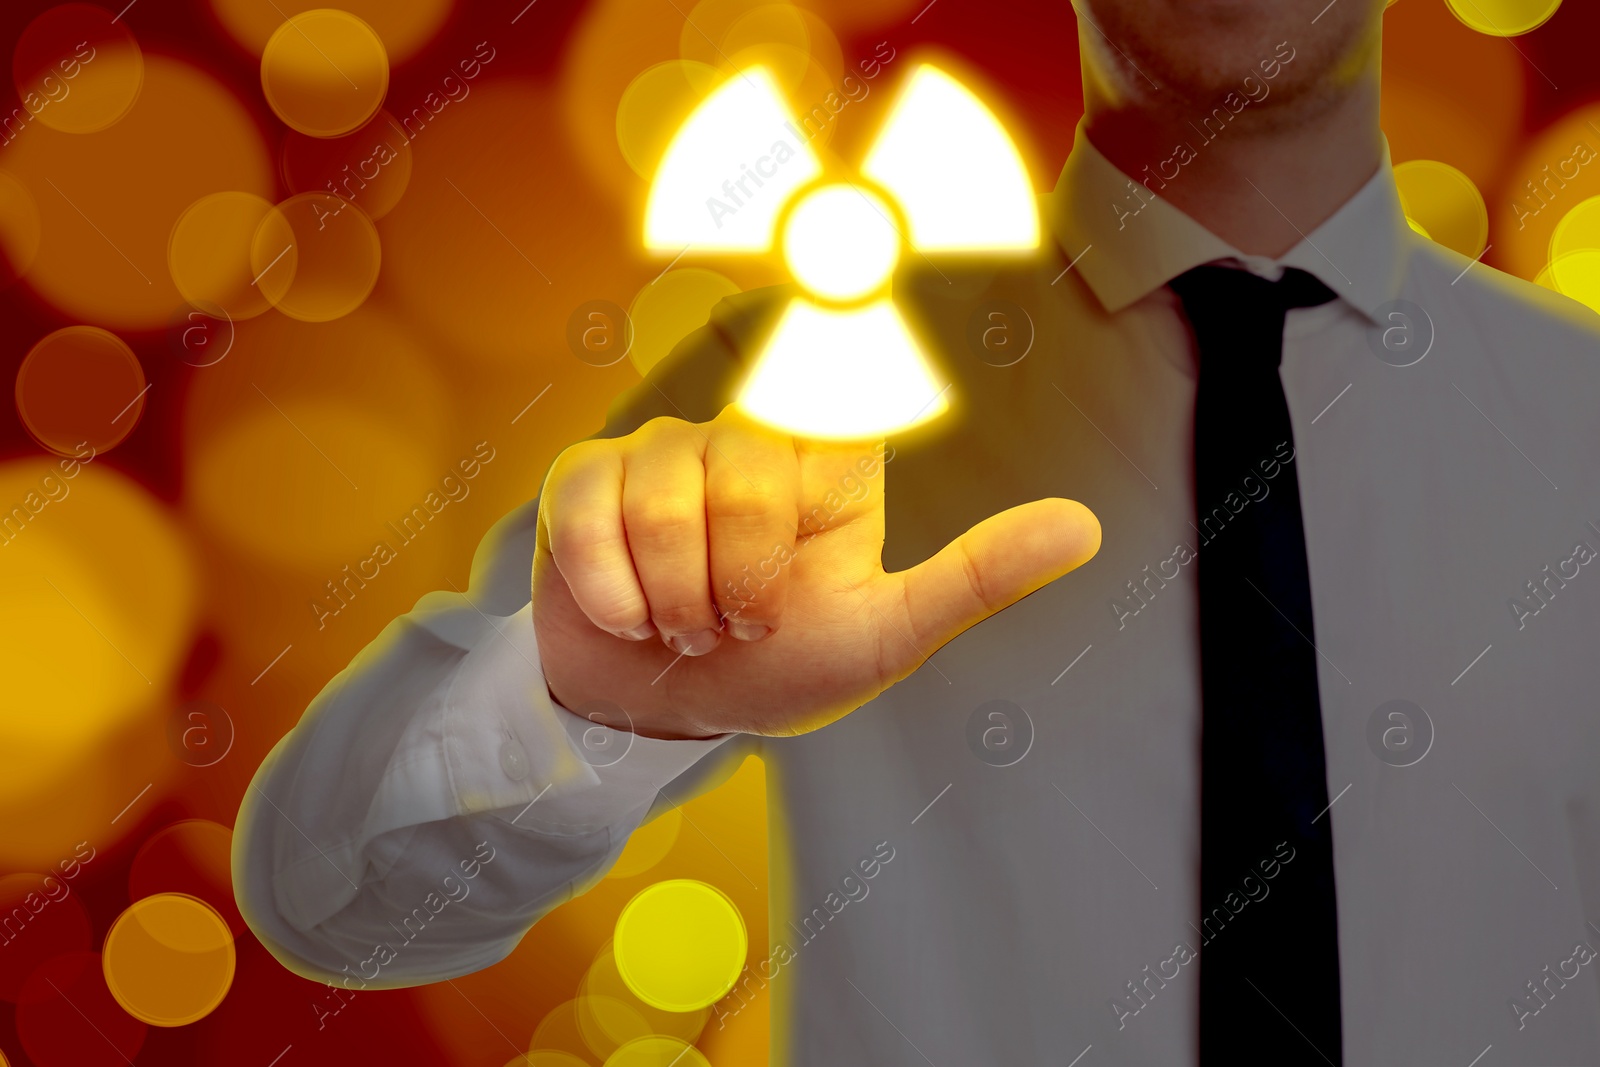 Image of Man touching glowing radiation warning symbol on digital screen against red background with blurred lights, closeup